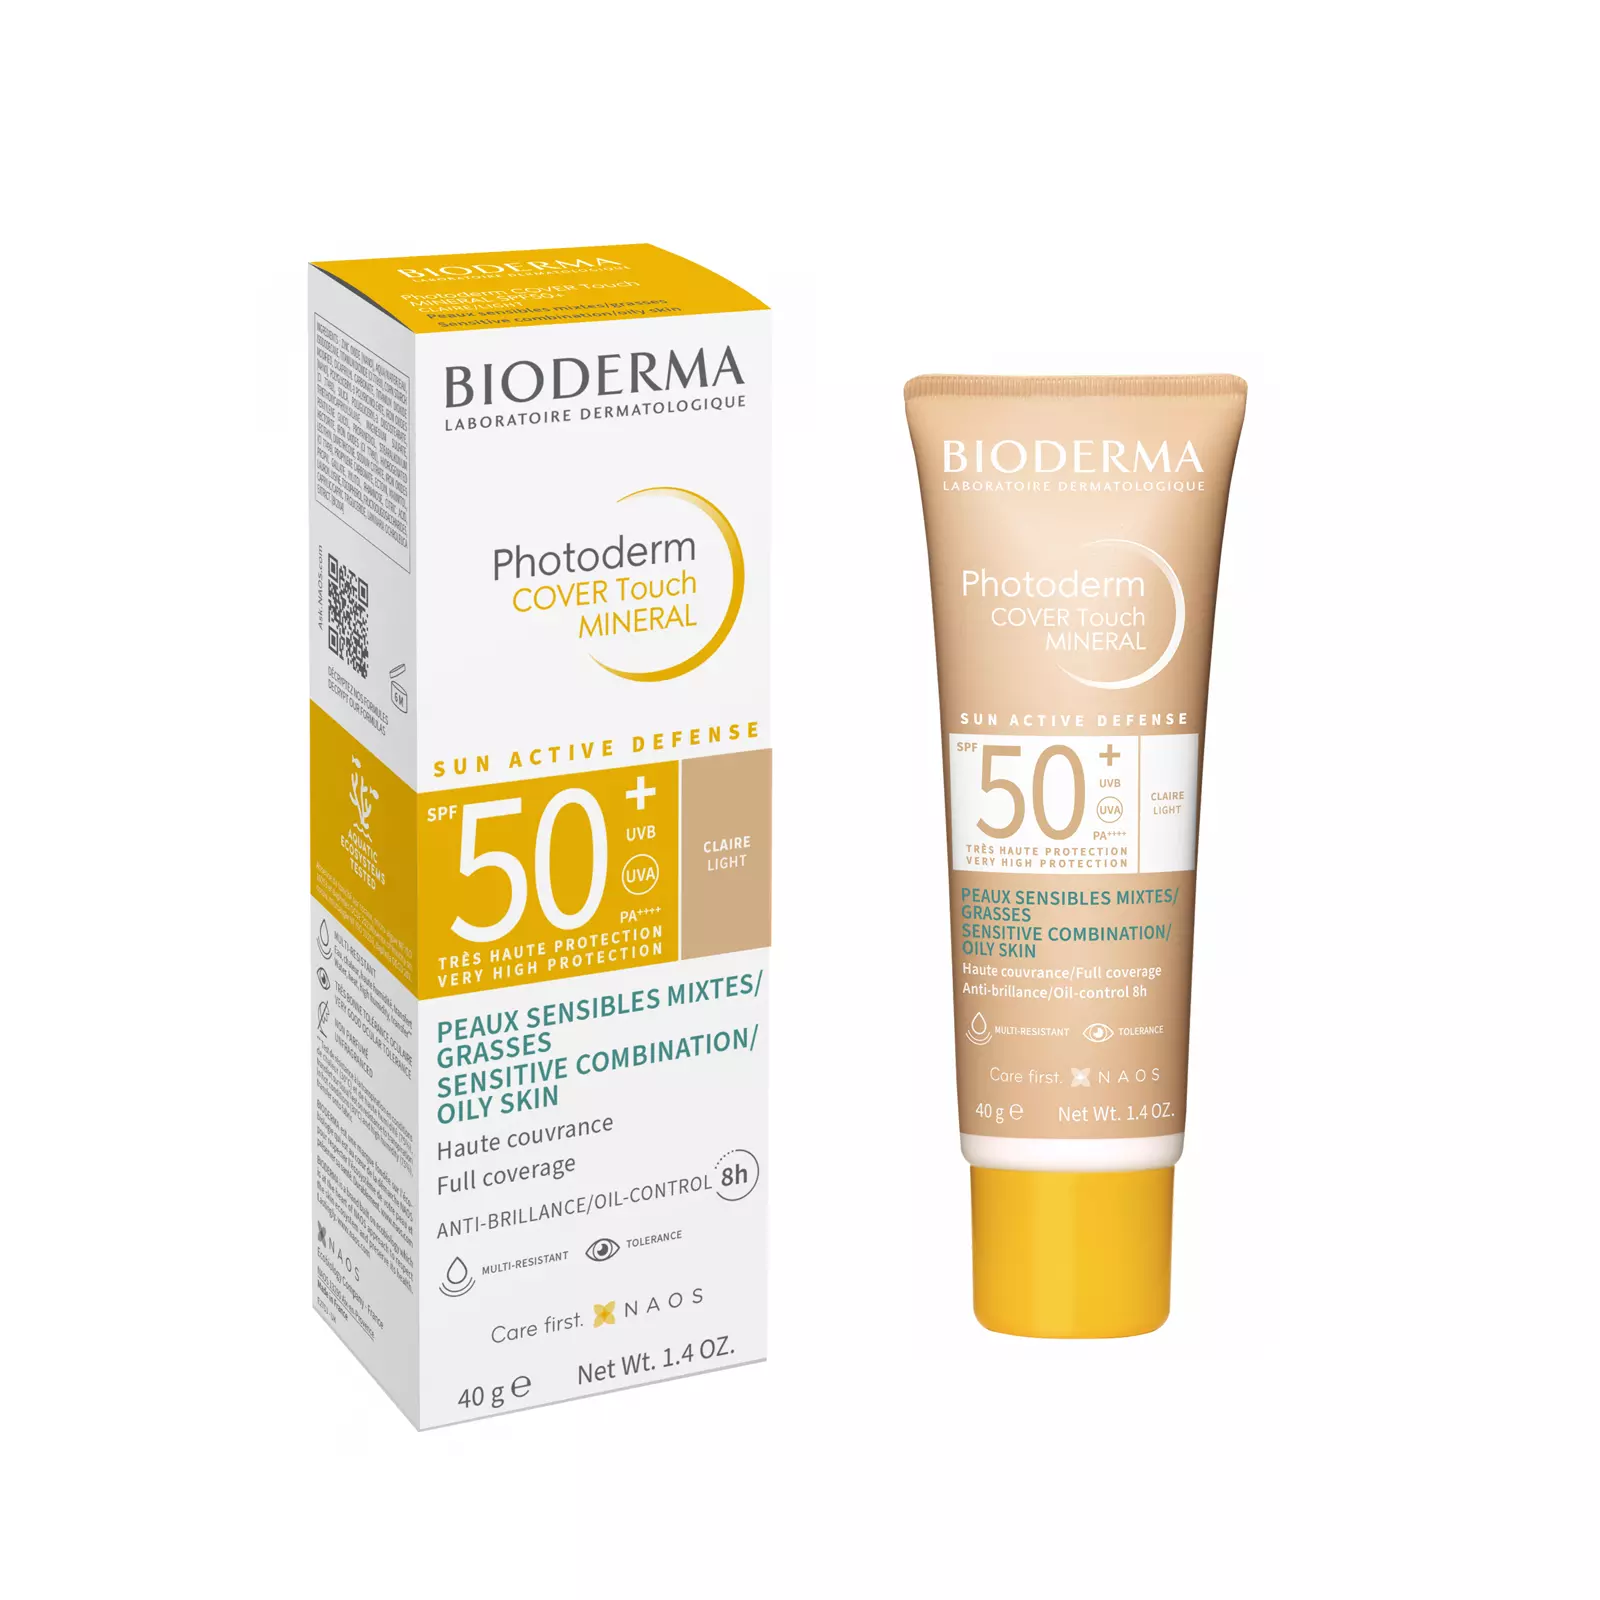 BIODERMA PHOTODERM COVER TOUCH MINERAL SPF50+ TEINTE CLAIRE 40GR